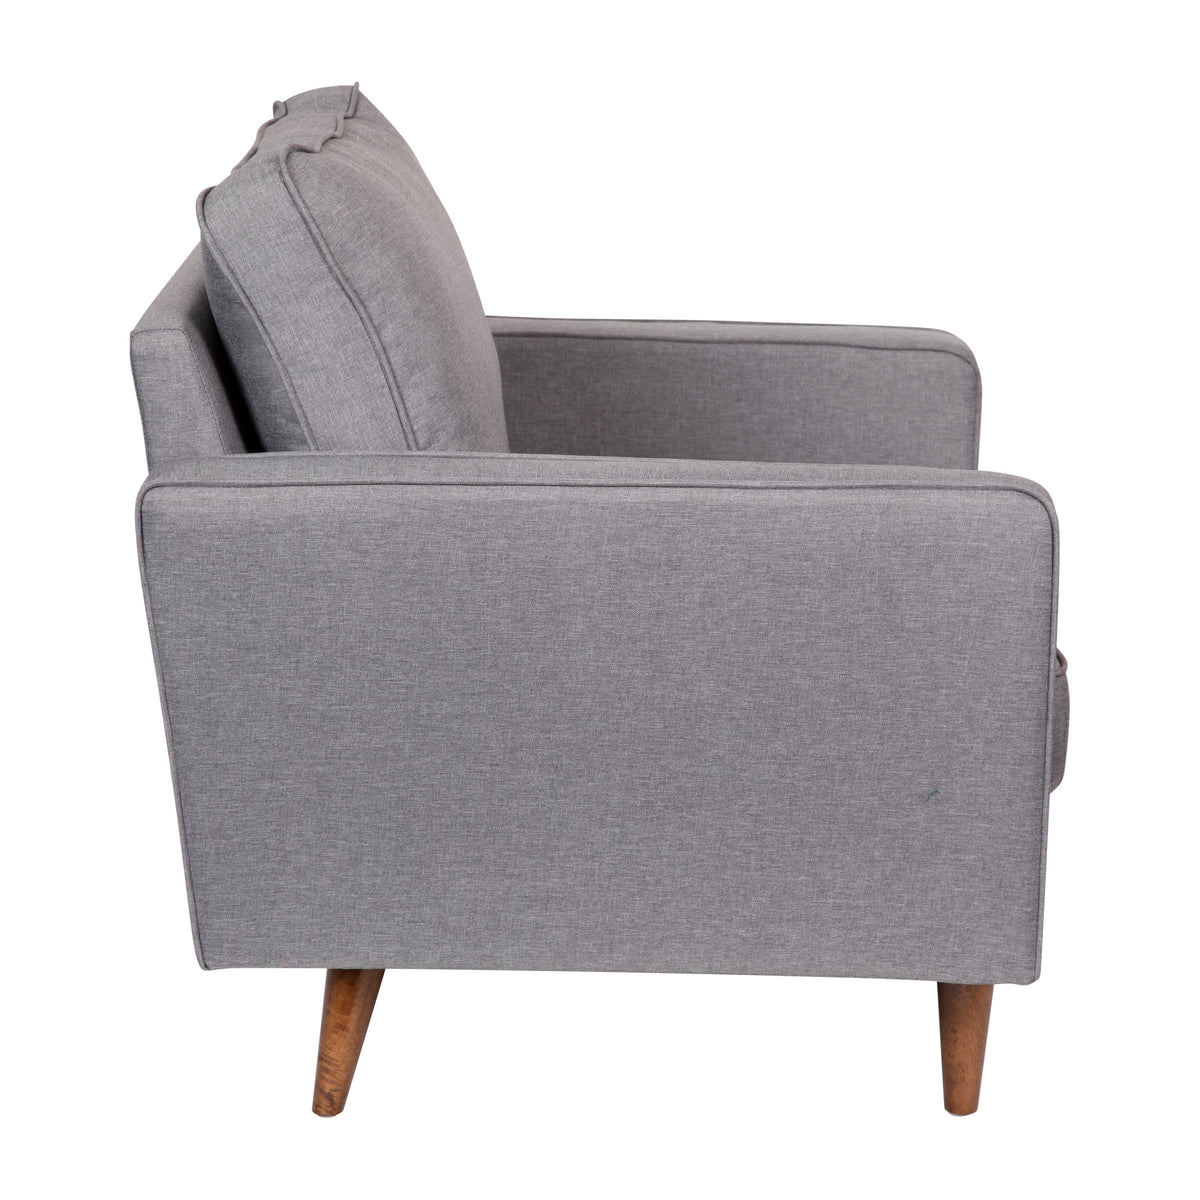 Slate Gray |#| Compact Slate Gray Faux Linen Upholstered Tufted Chair with Wooden Legs